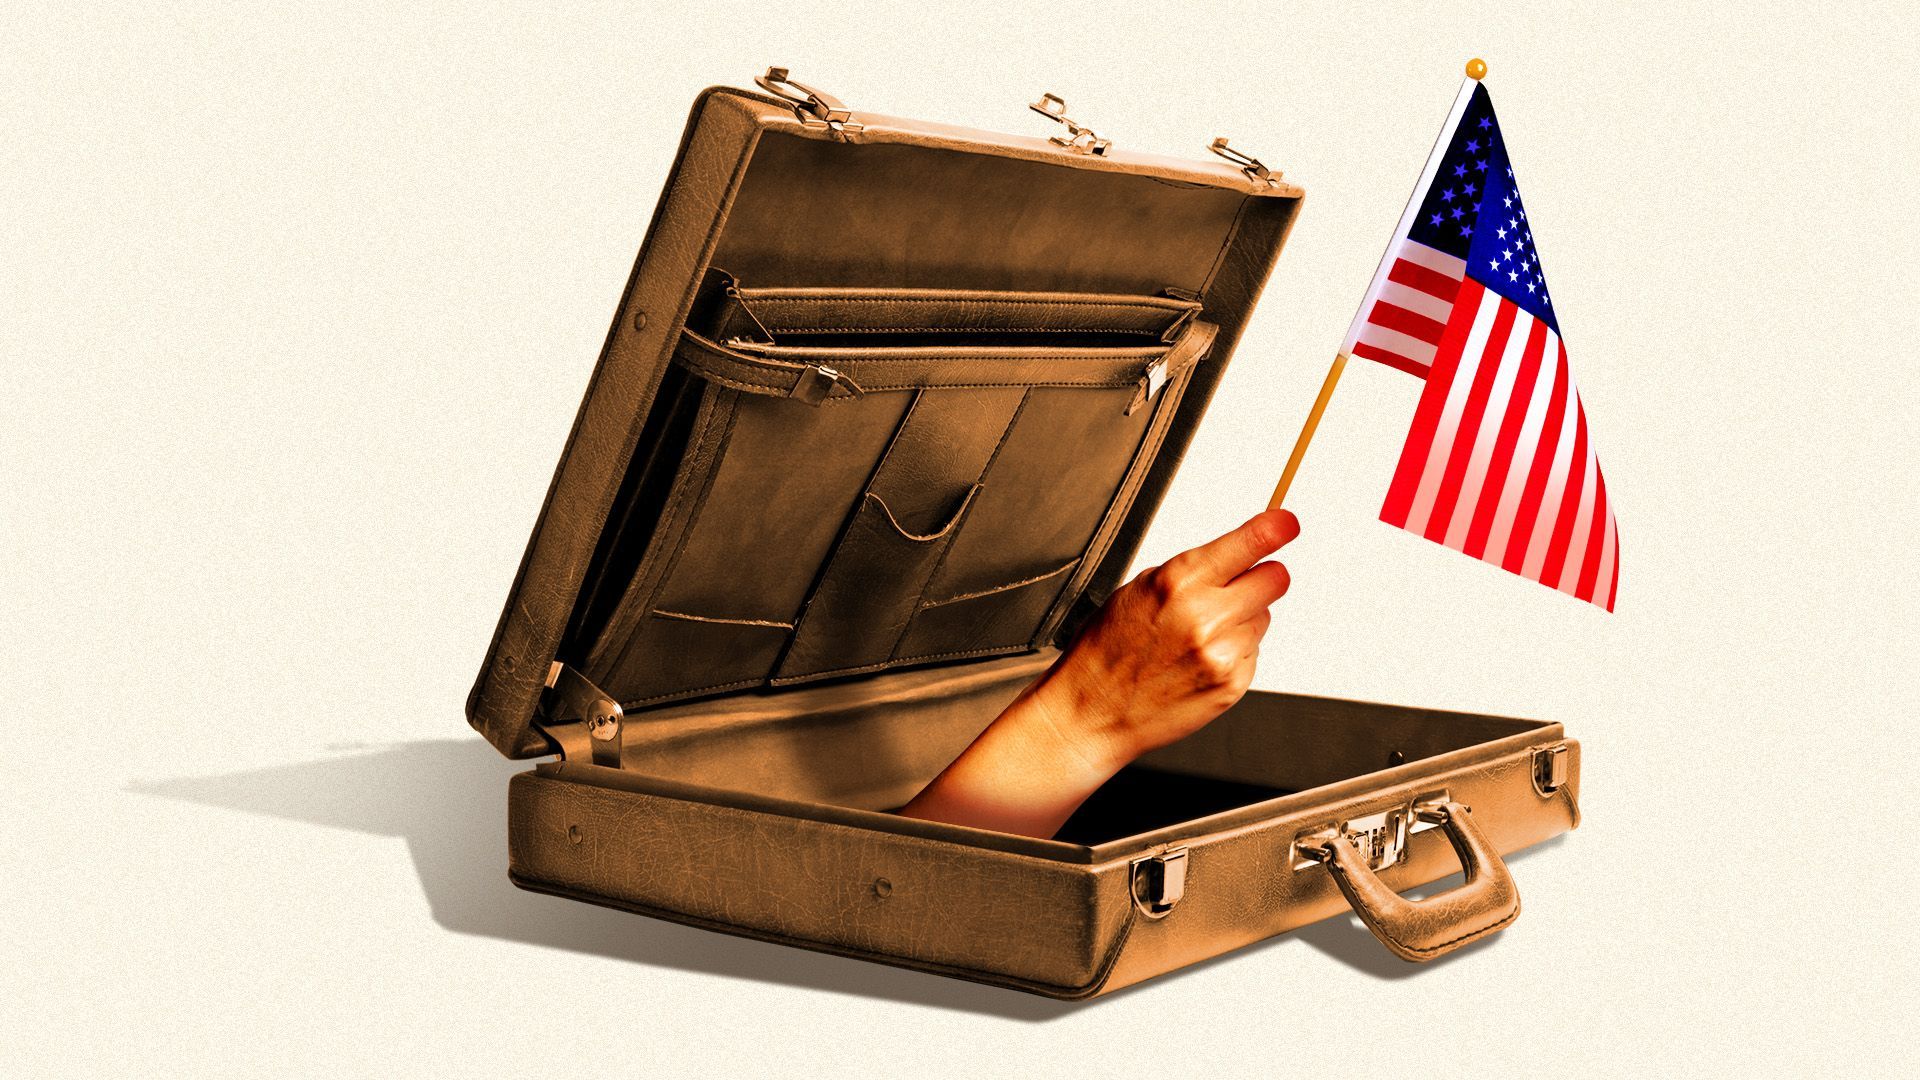 Illustration of a hand waving an American flag emerging from a briefcase